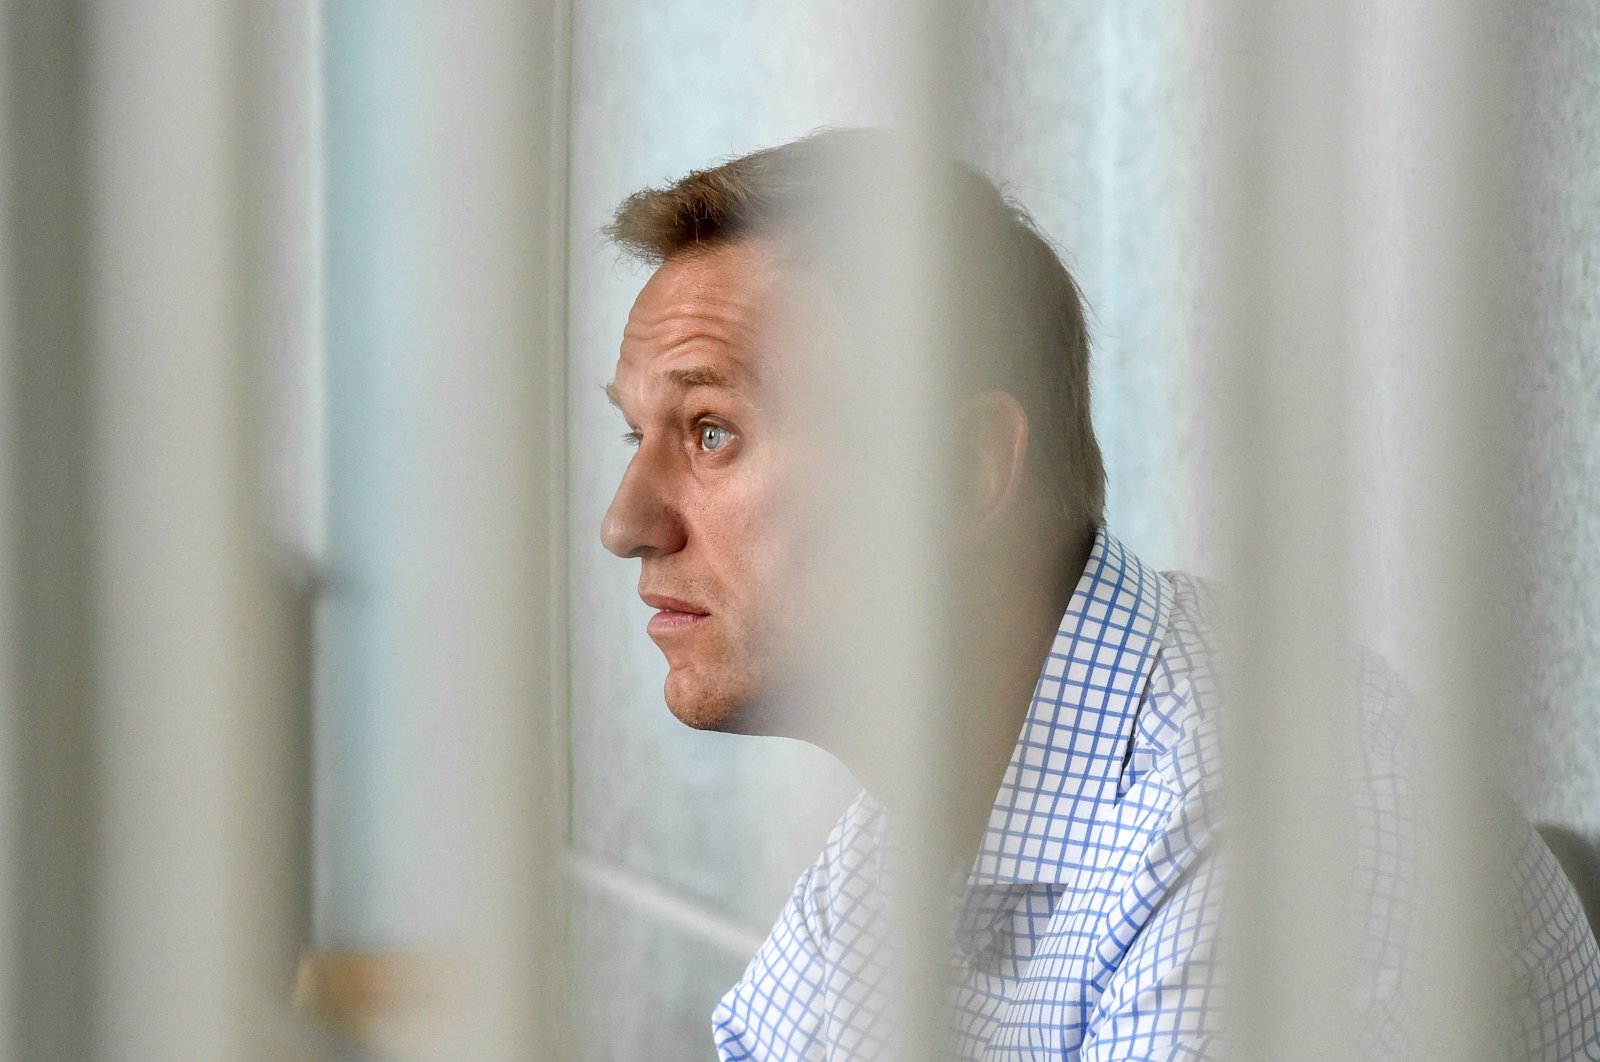 Russian opposition leader Alexei Navalny attends a hearing at a court in Moscow, Russia, June 24, 2019. (AFP Photo)